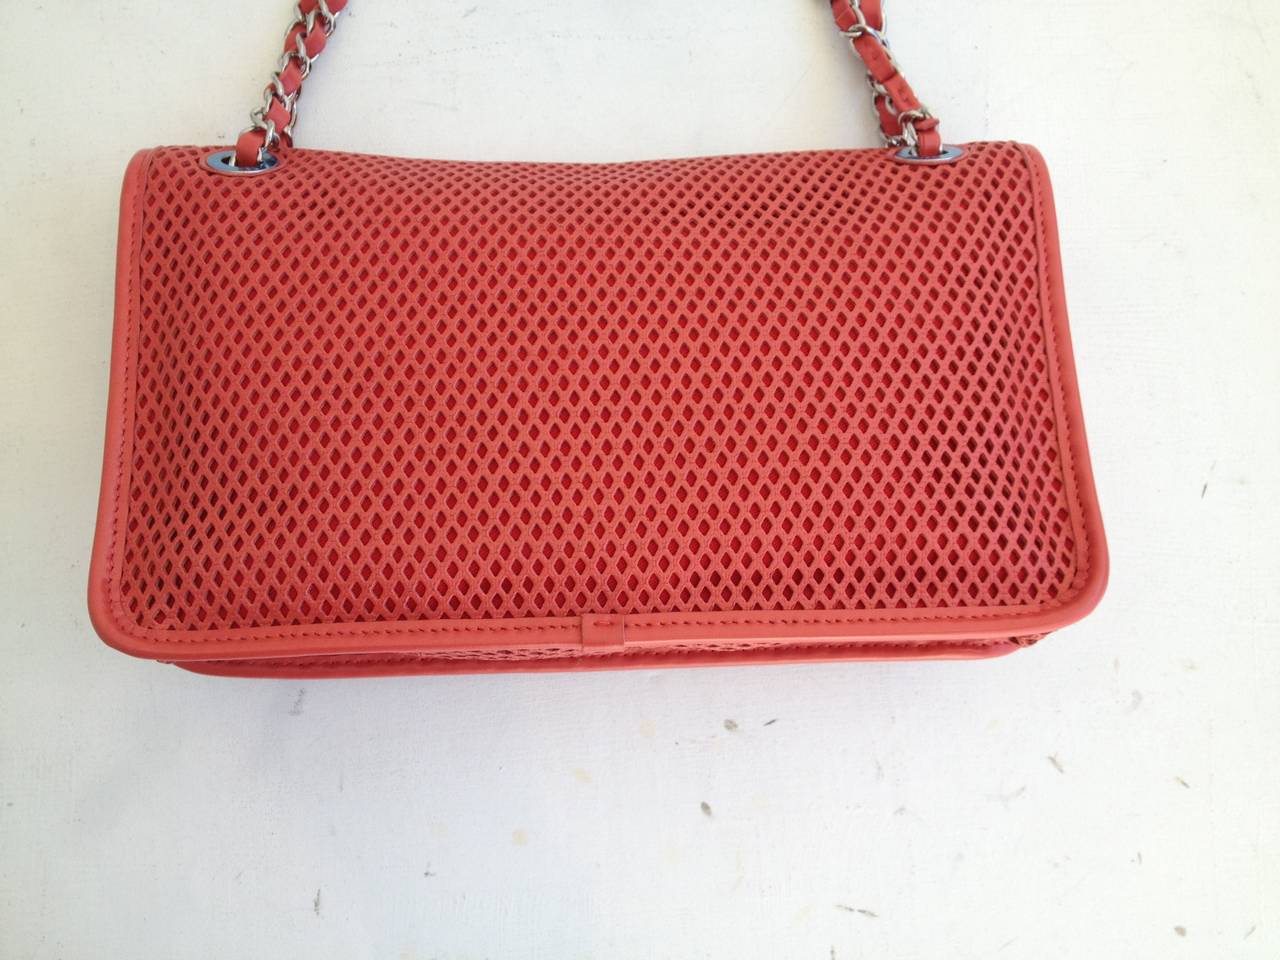 From the pre-Spring 2013 collection, the Up In The Air bag is at once fun, whimsical, and utterly fabulous. The piece departs from the usual quilted leather with its finely perforated coral red calfskin, while 2.55-inspired shape keeps the piece